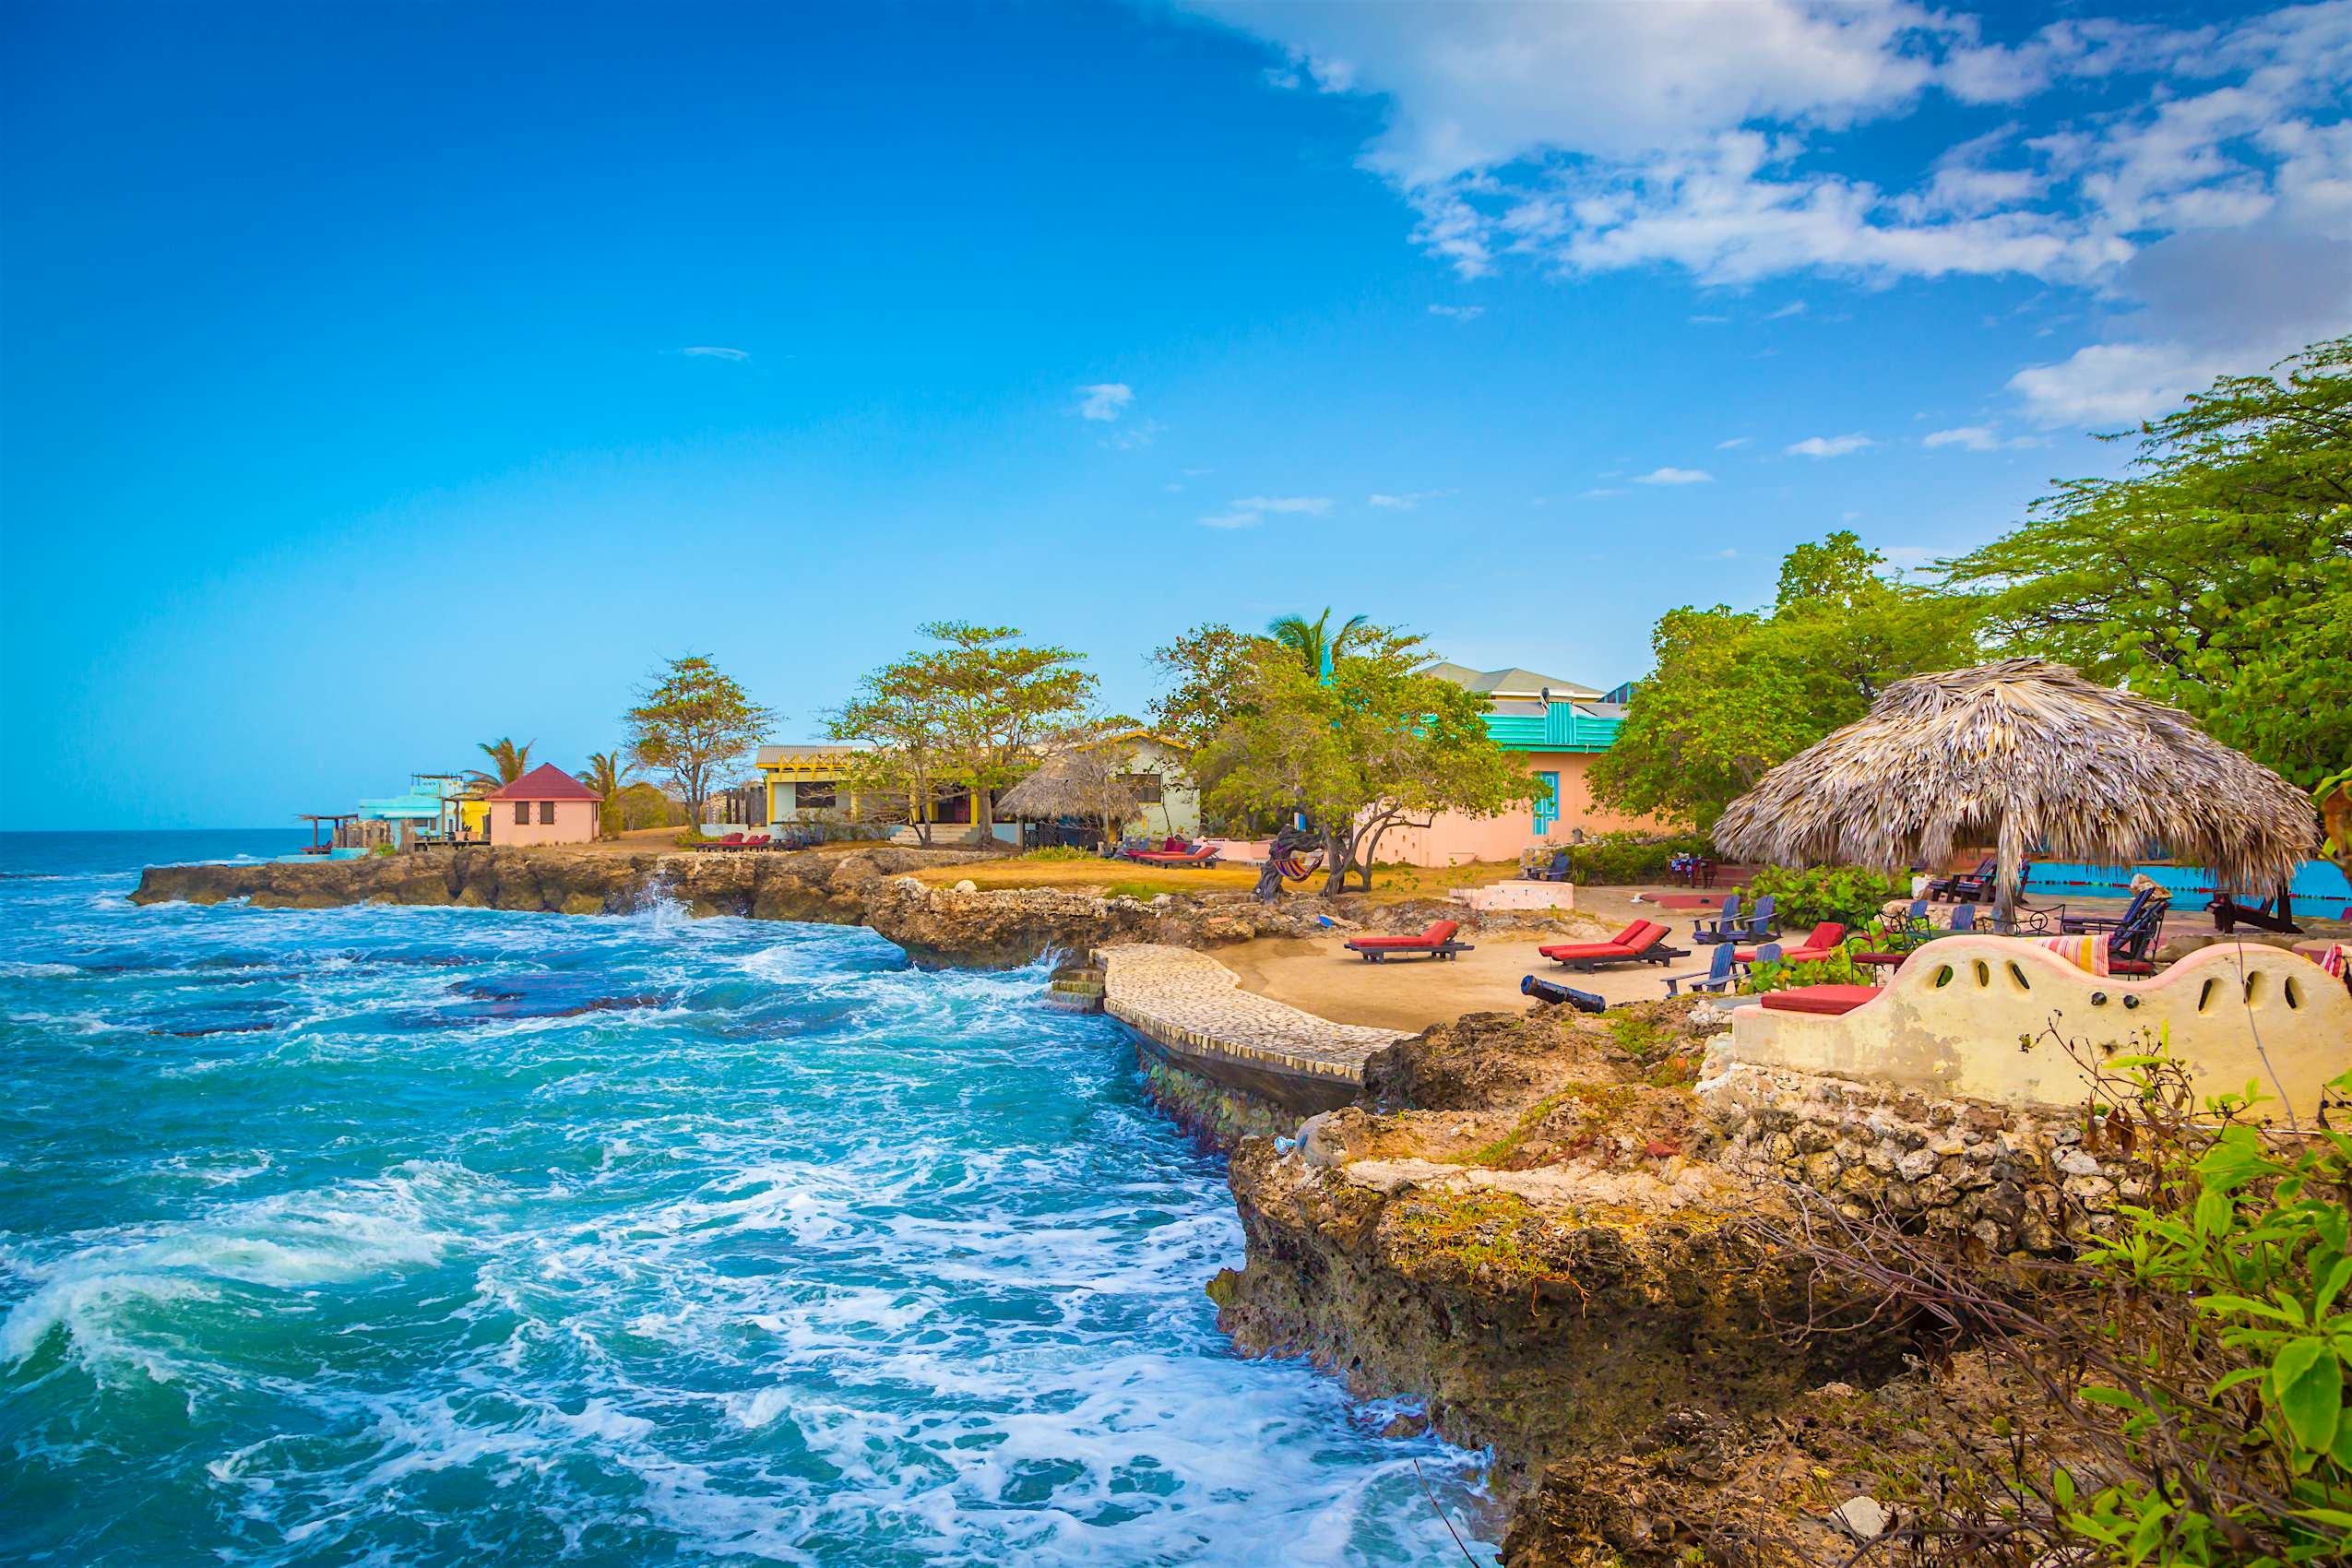 4 day trips to jamaica